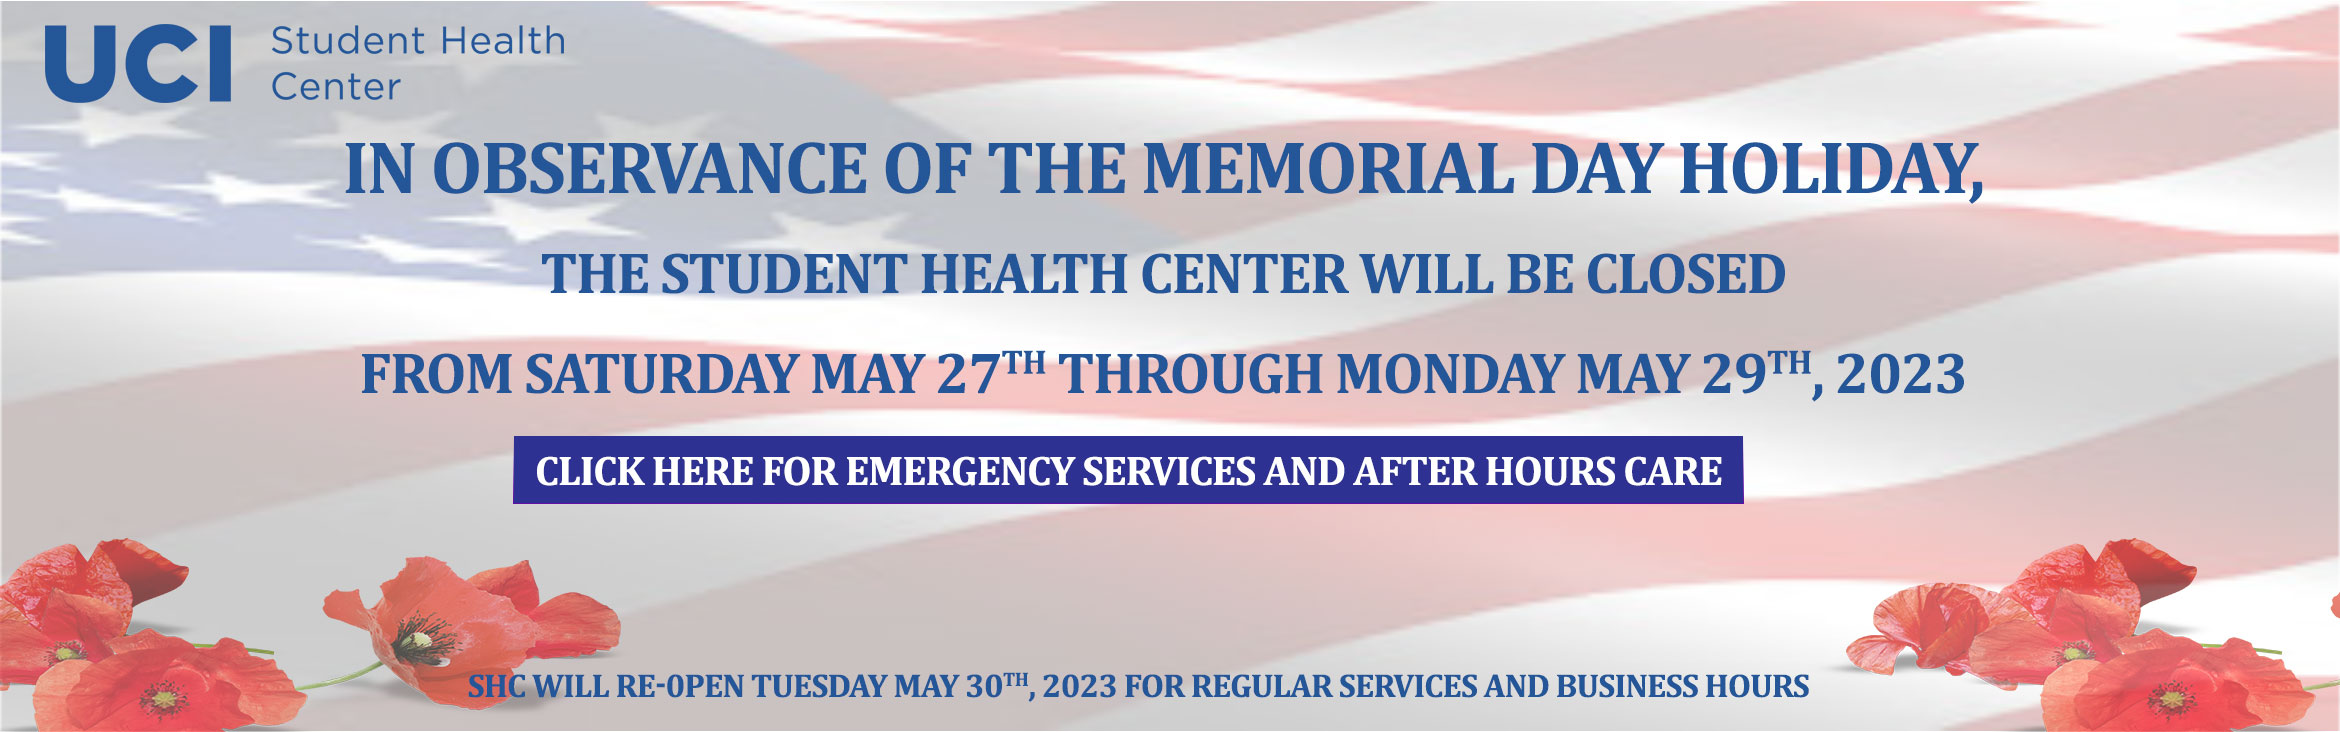 In Observance of the Memorial Day holiday, the Student Health Center will be closed from Saturday May 27, 2023 through Monday May 29, 2023. 